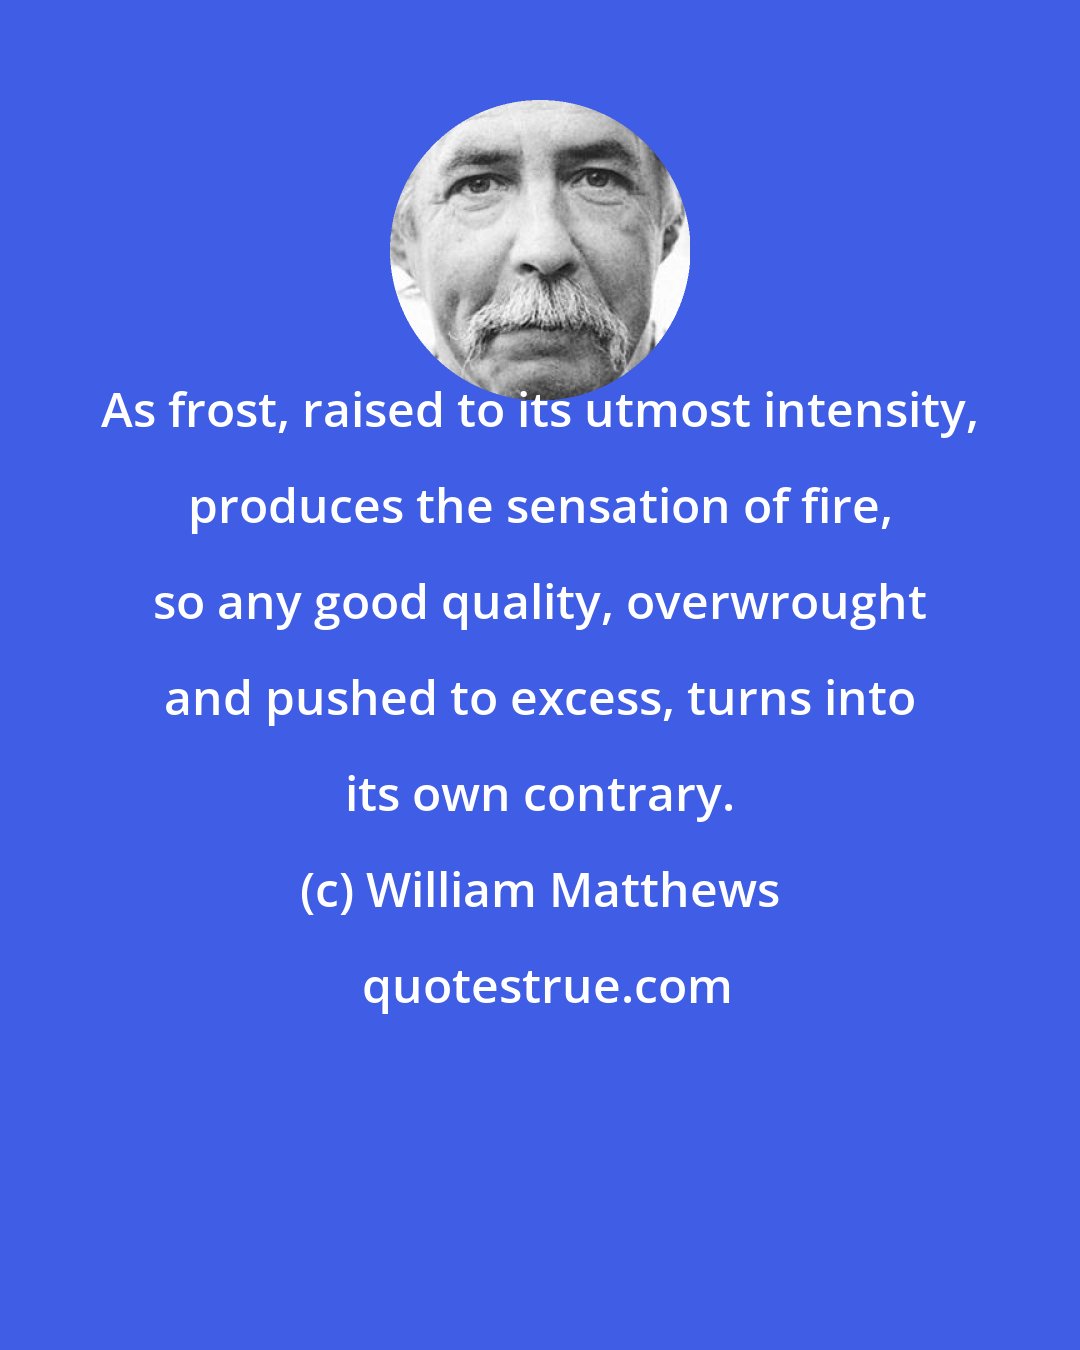 William Matthews: As frost, raised to its utmost intensity, produces the sensation of fire, so any good quality, overwrought and pushed to excess, turns into its own contrary.